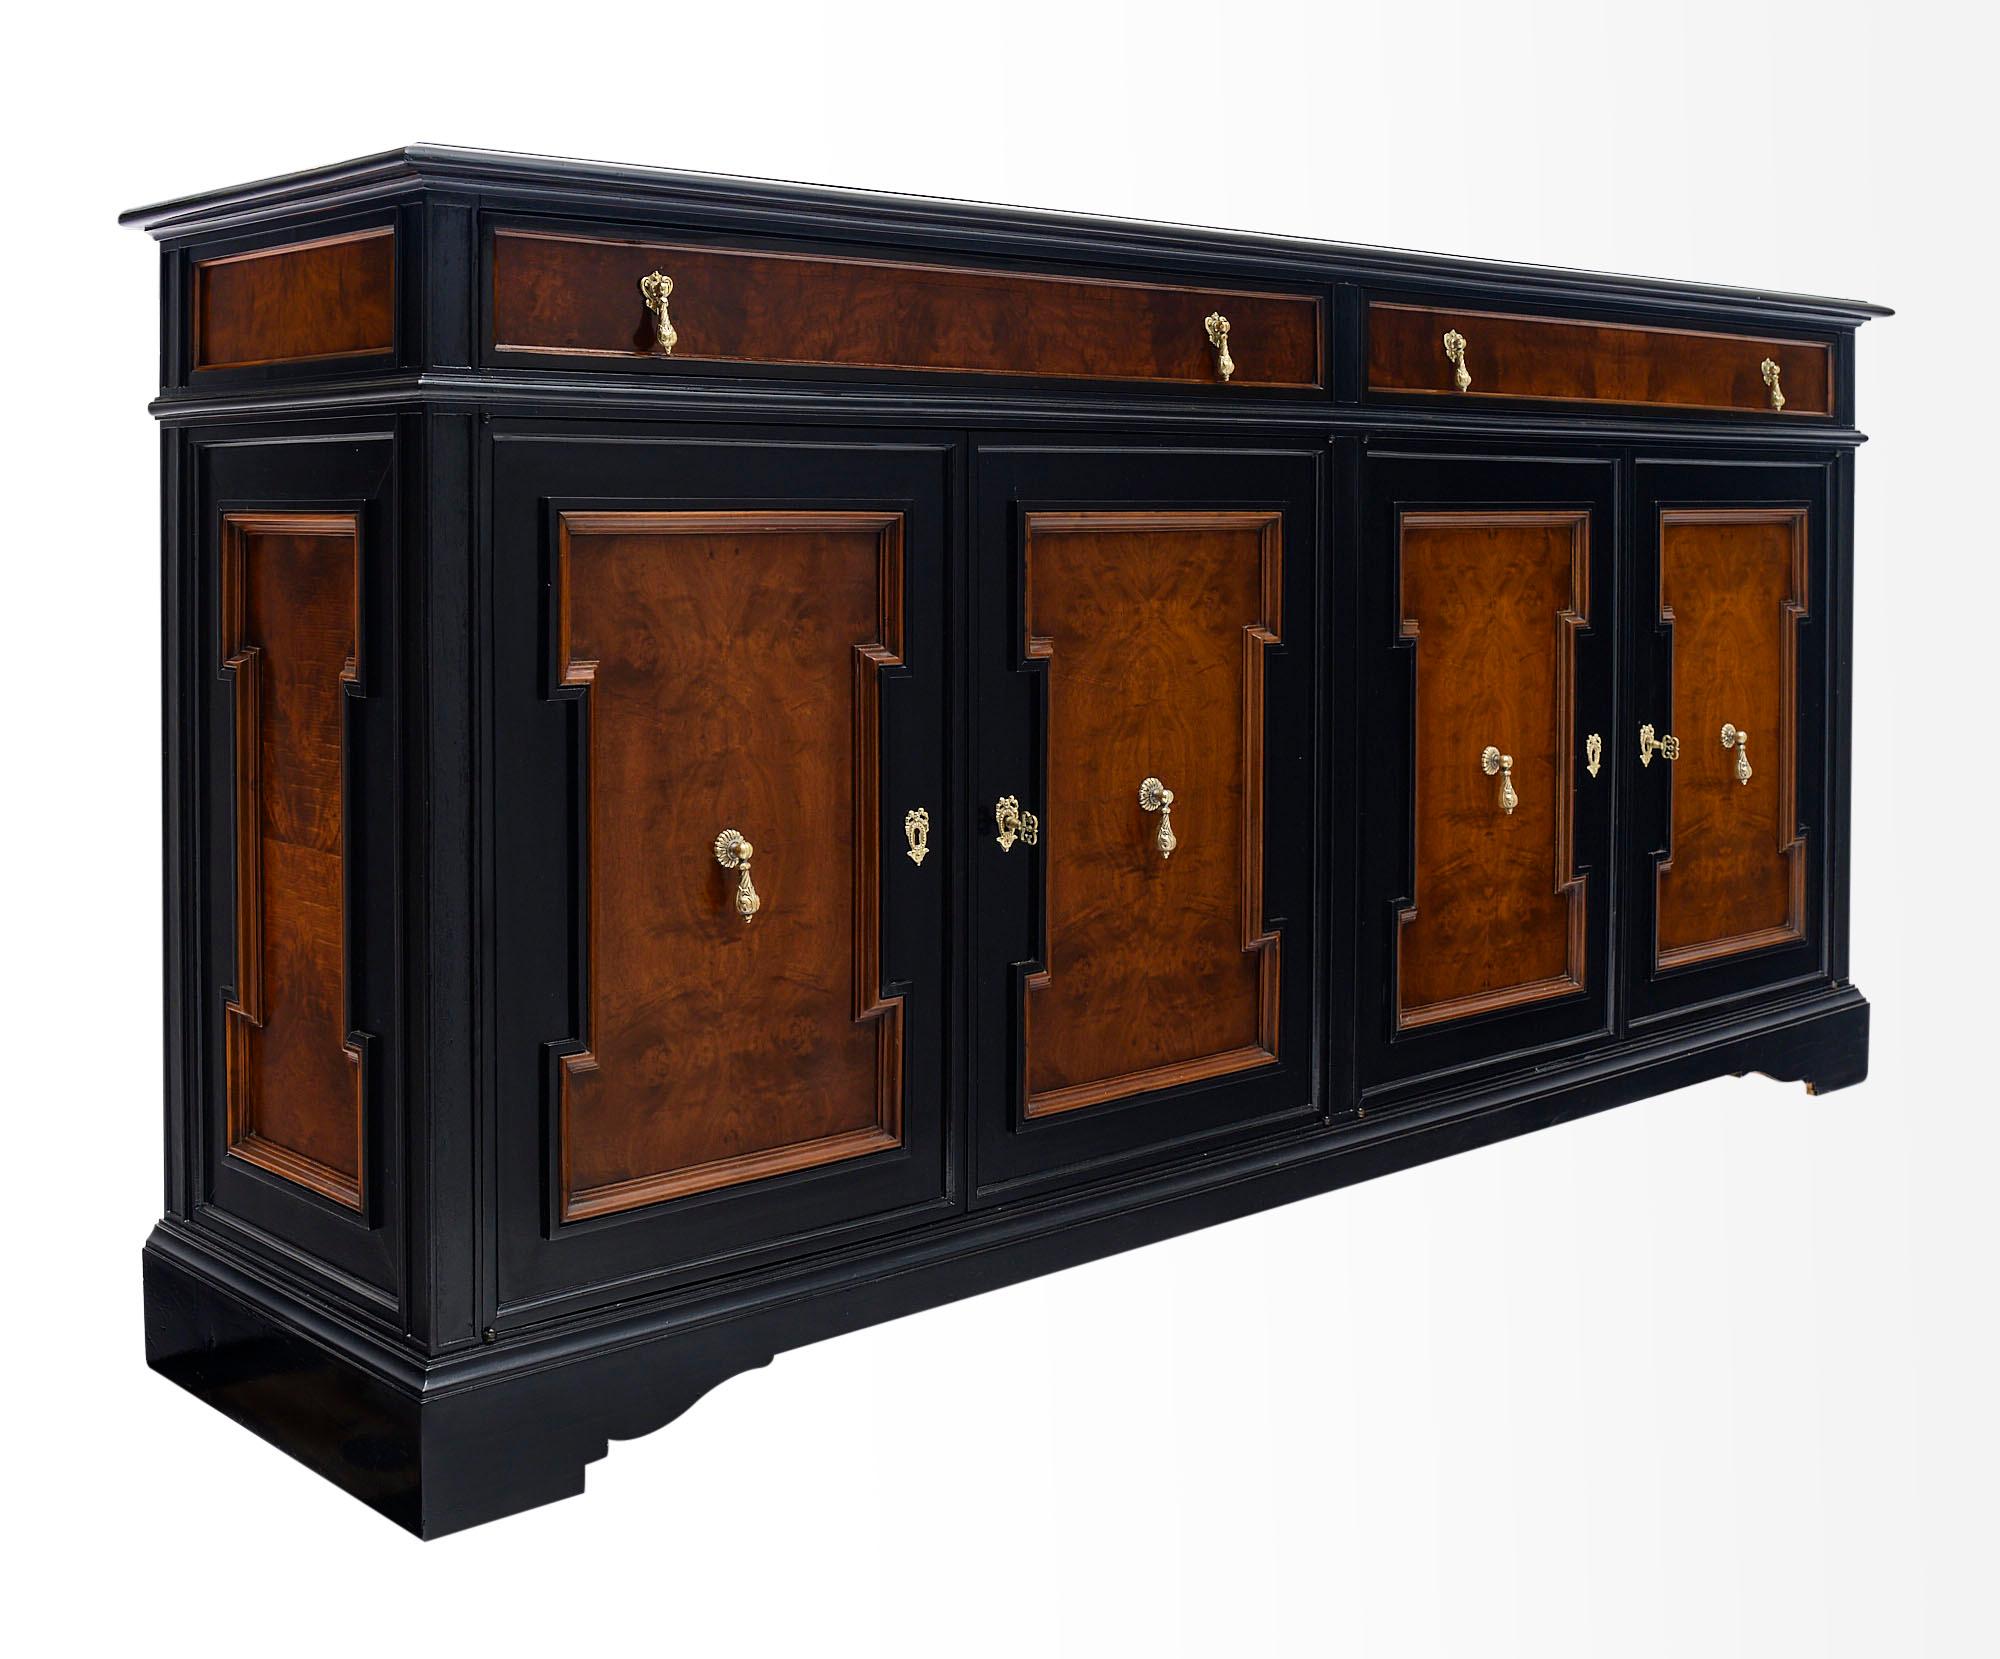 Buffet; French; made of solid ebonized walnut and burled walnut. There are two dovetailed drawers and four doors that open up to interior shelving. The piece boasts finely cast brass hardware and a lustrous French polish.